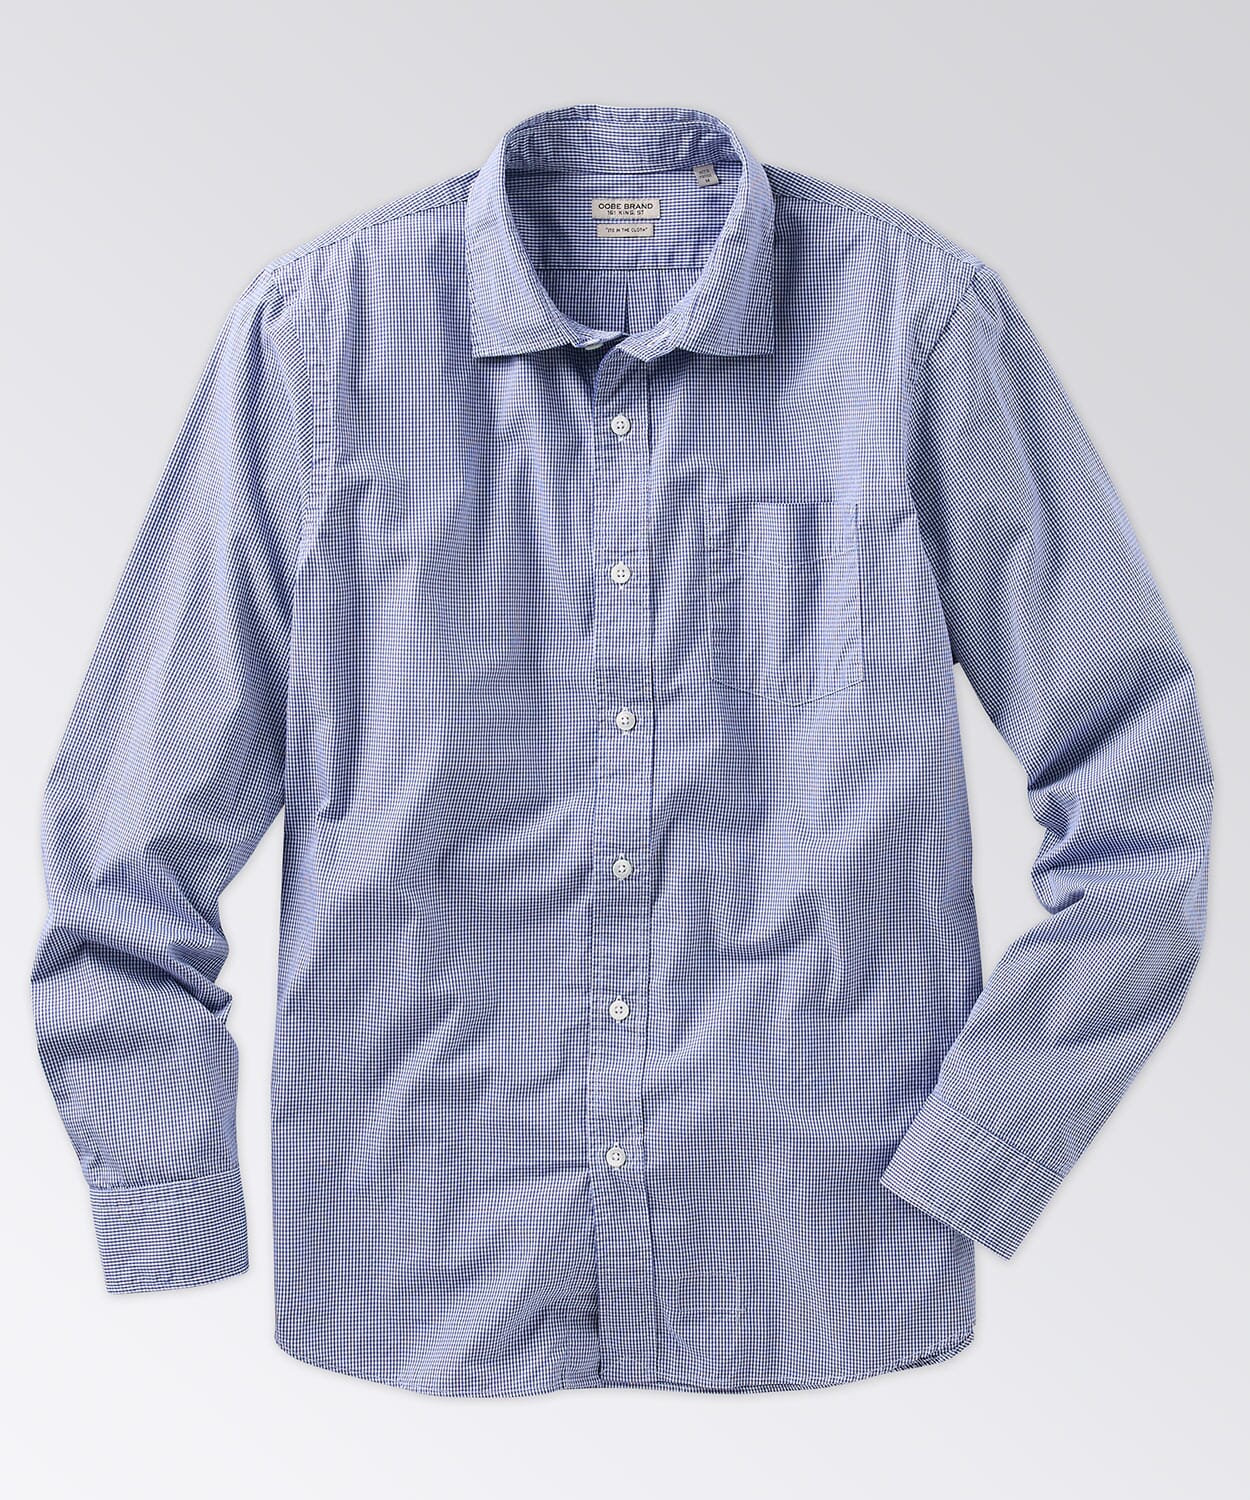 Excella Shirt Button Downs OOBE BRAND Navy Gingham S 